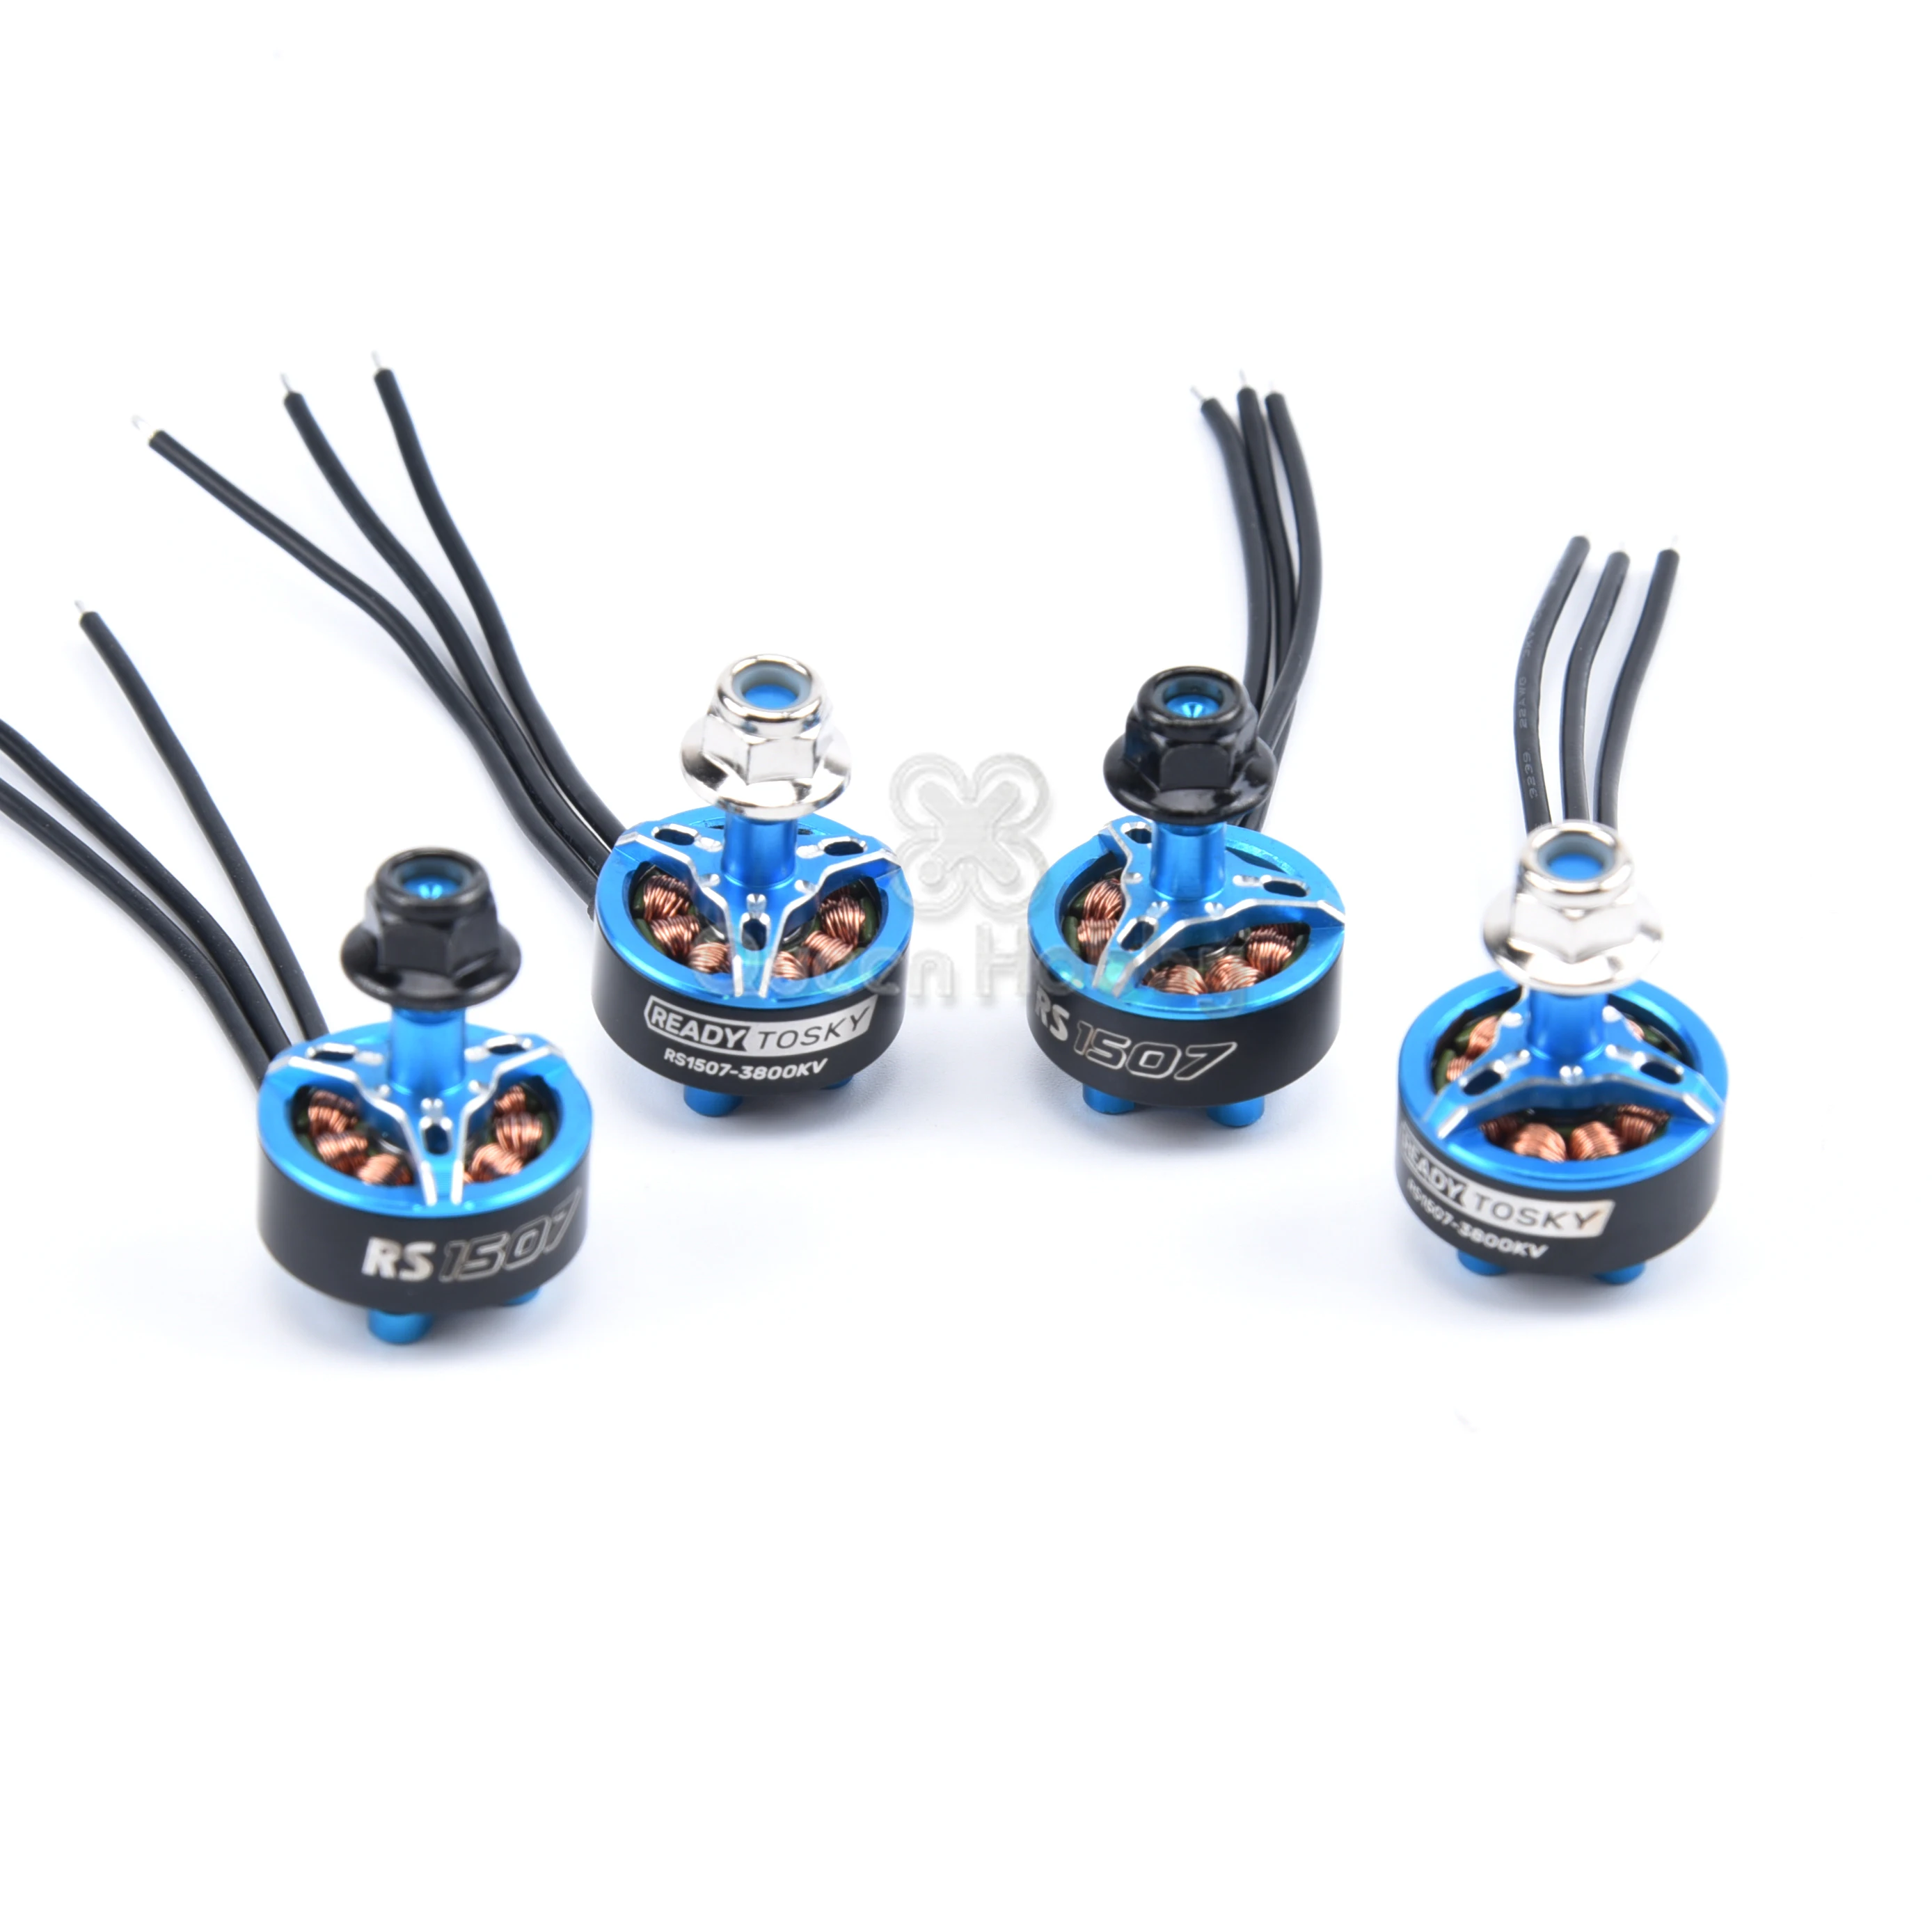 

NEW RS1507 1507 3800KV 3-4S Brushless Motor CW CCW For Micro Mini FPV RC Racing Drone DIY Quadcopter Cineboy 146mm Cloud-149 149